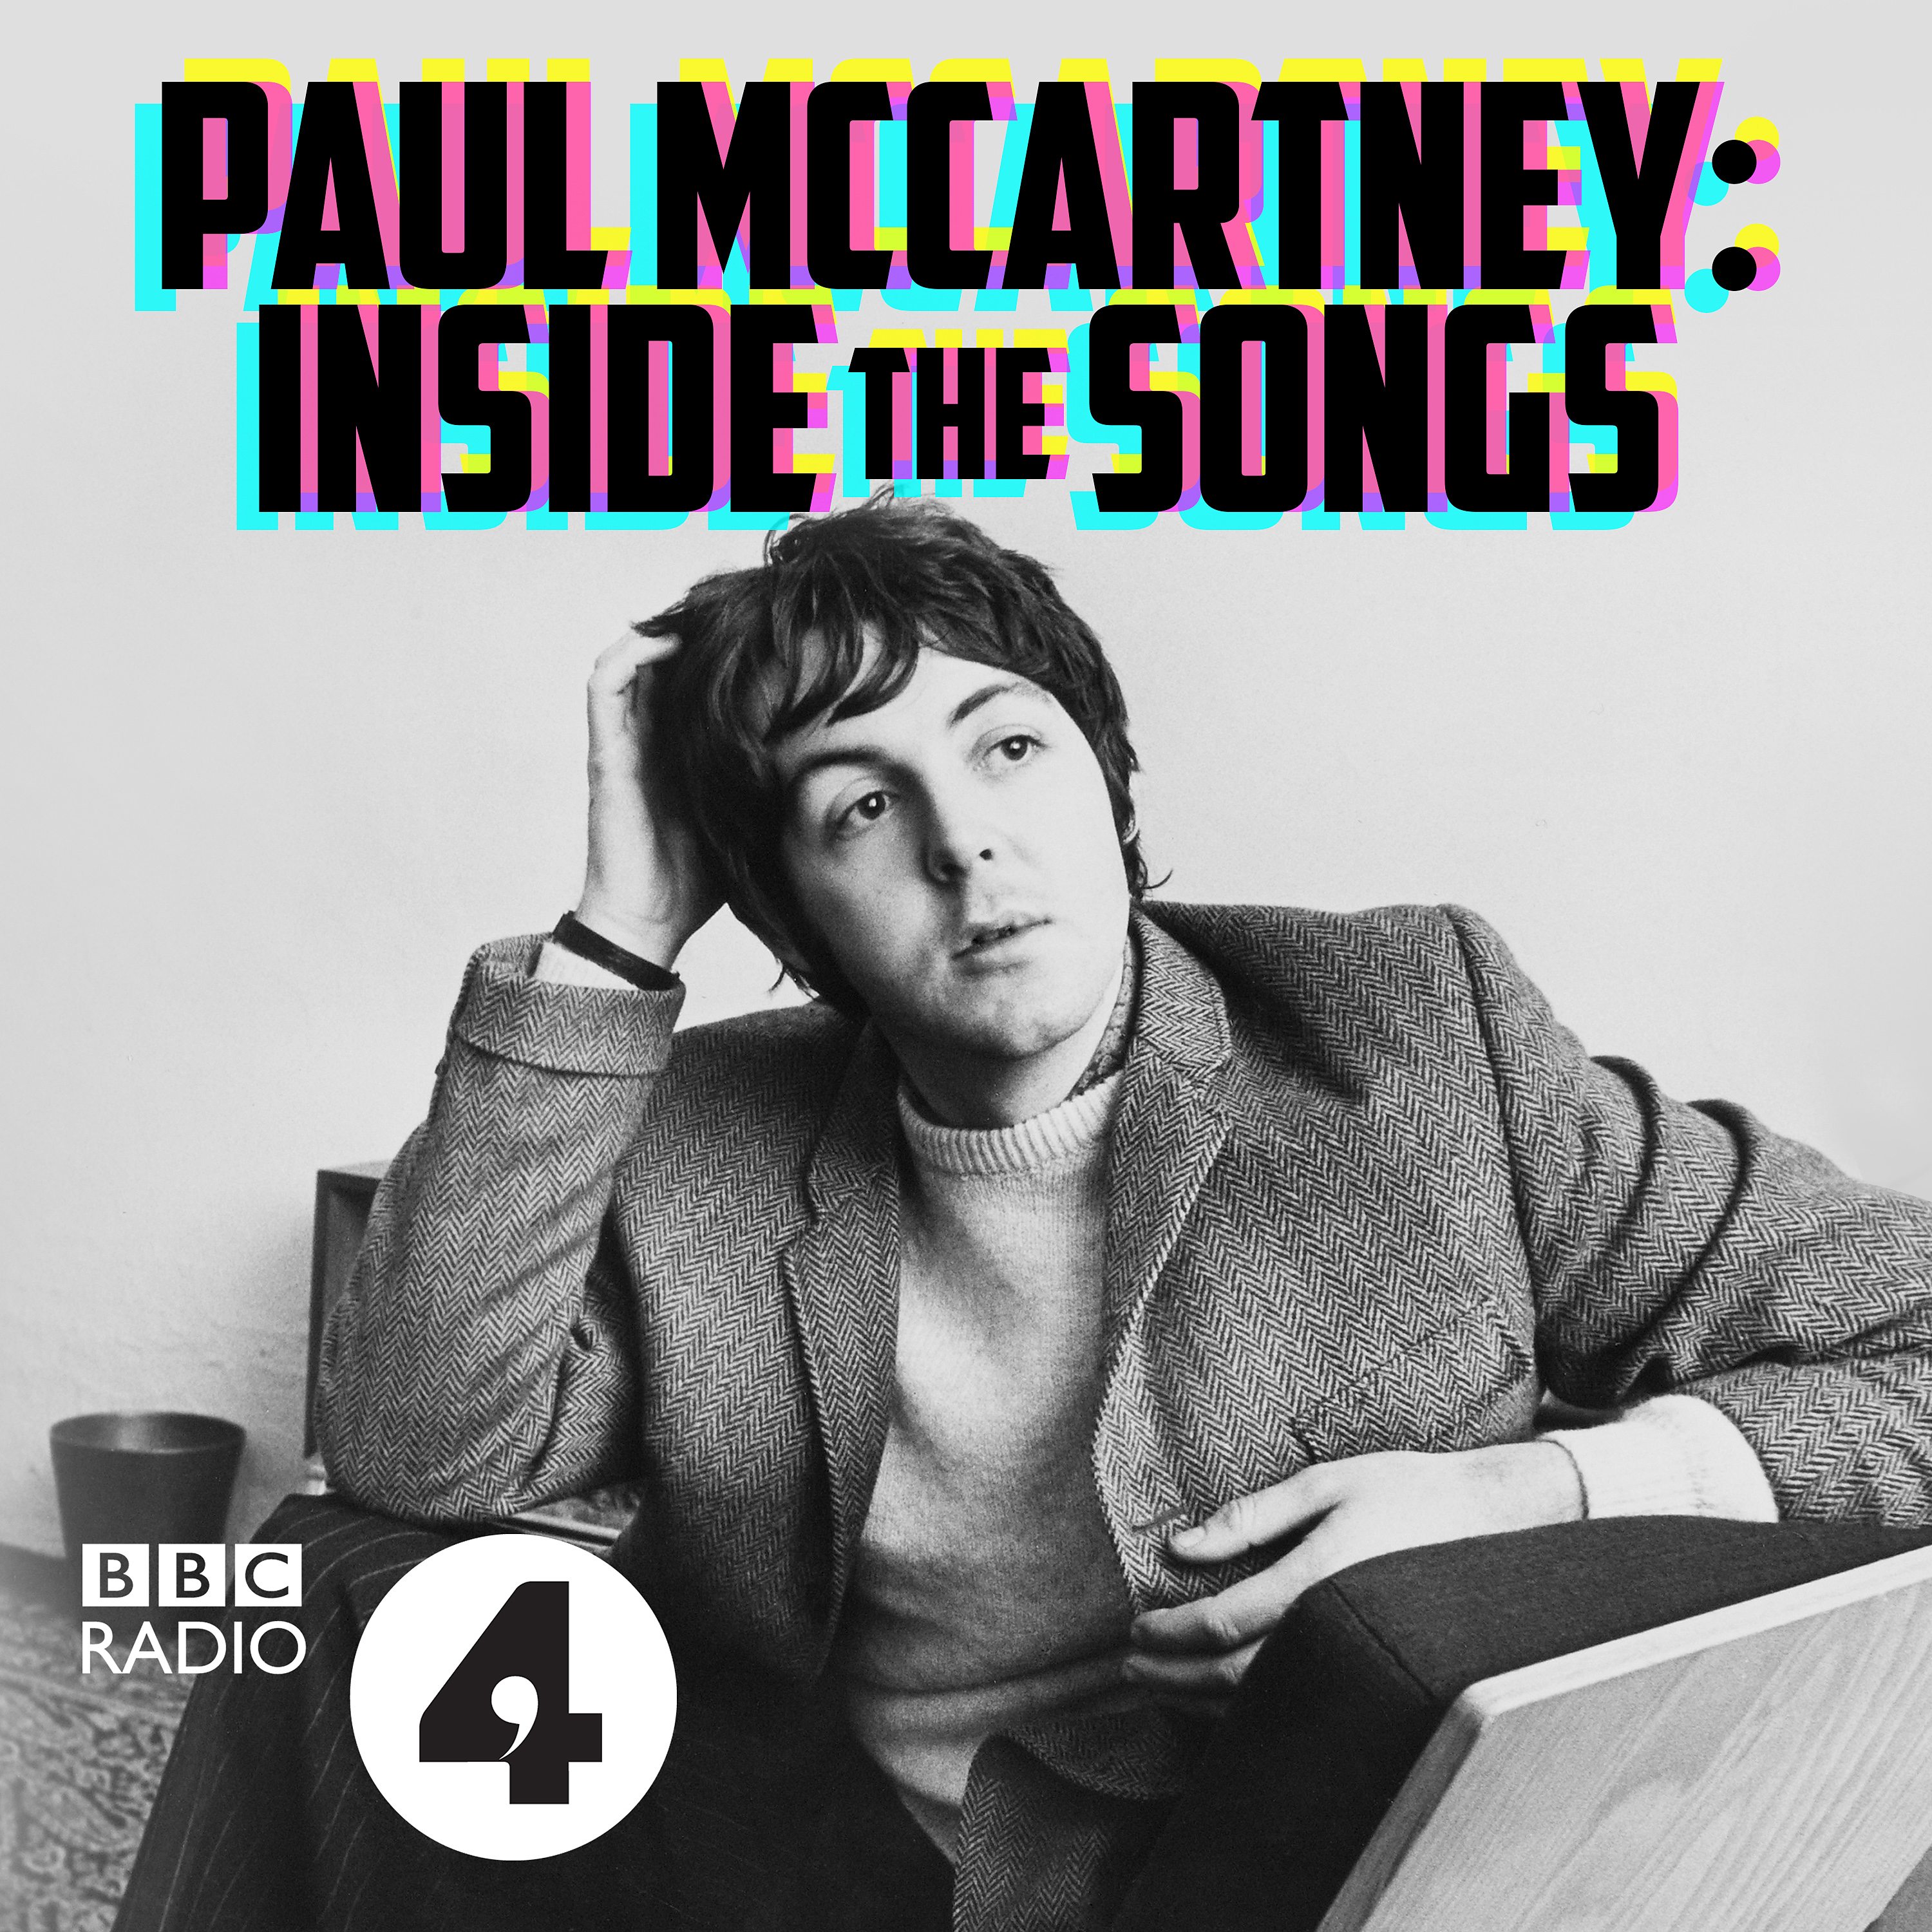 Paul McCartney on How ‘All My Loving’ Shot The Beatles to Superstardom